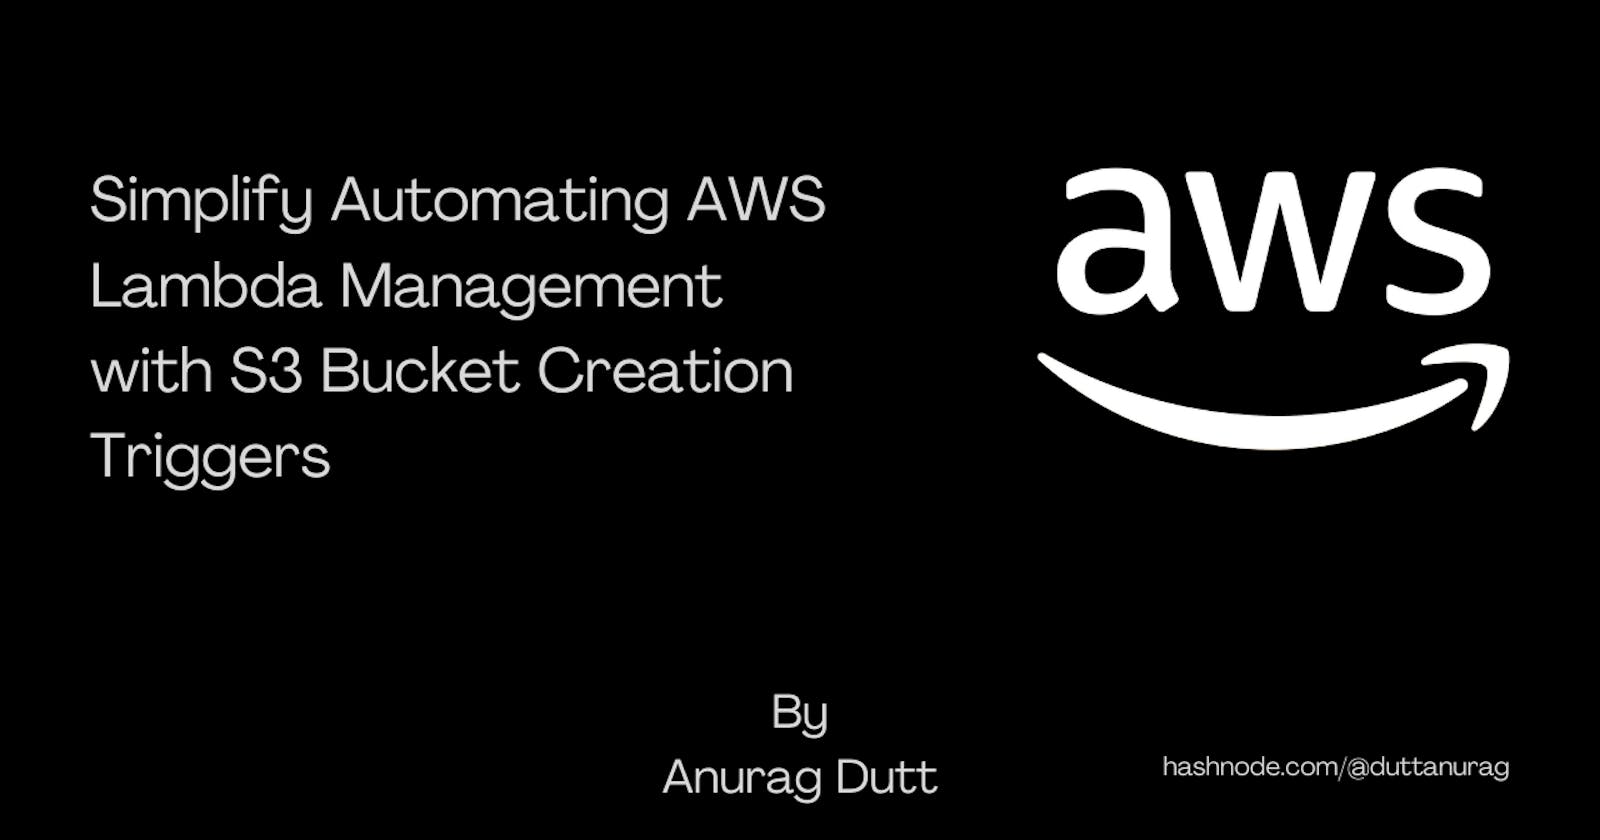 Simplify Automating AWS Lambda Management with S3 Bucket Creation Triggers